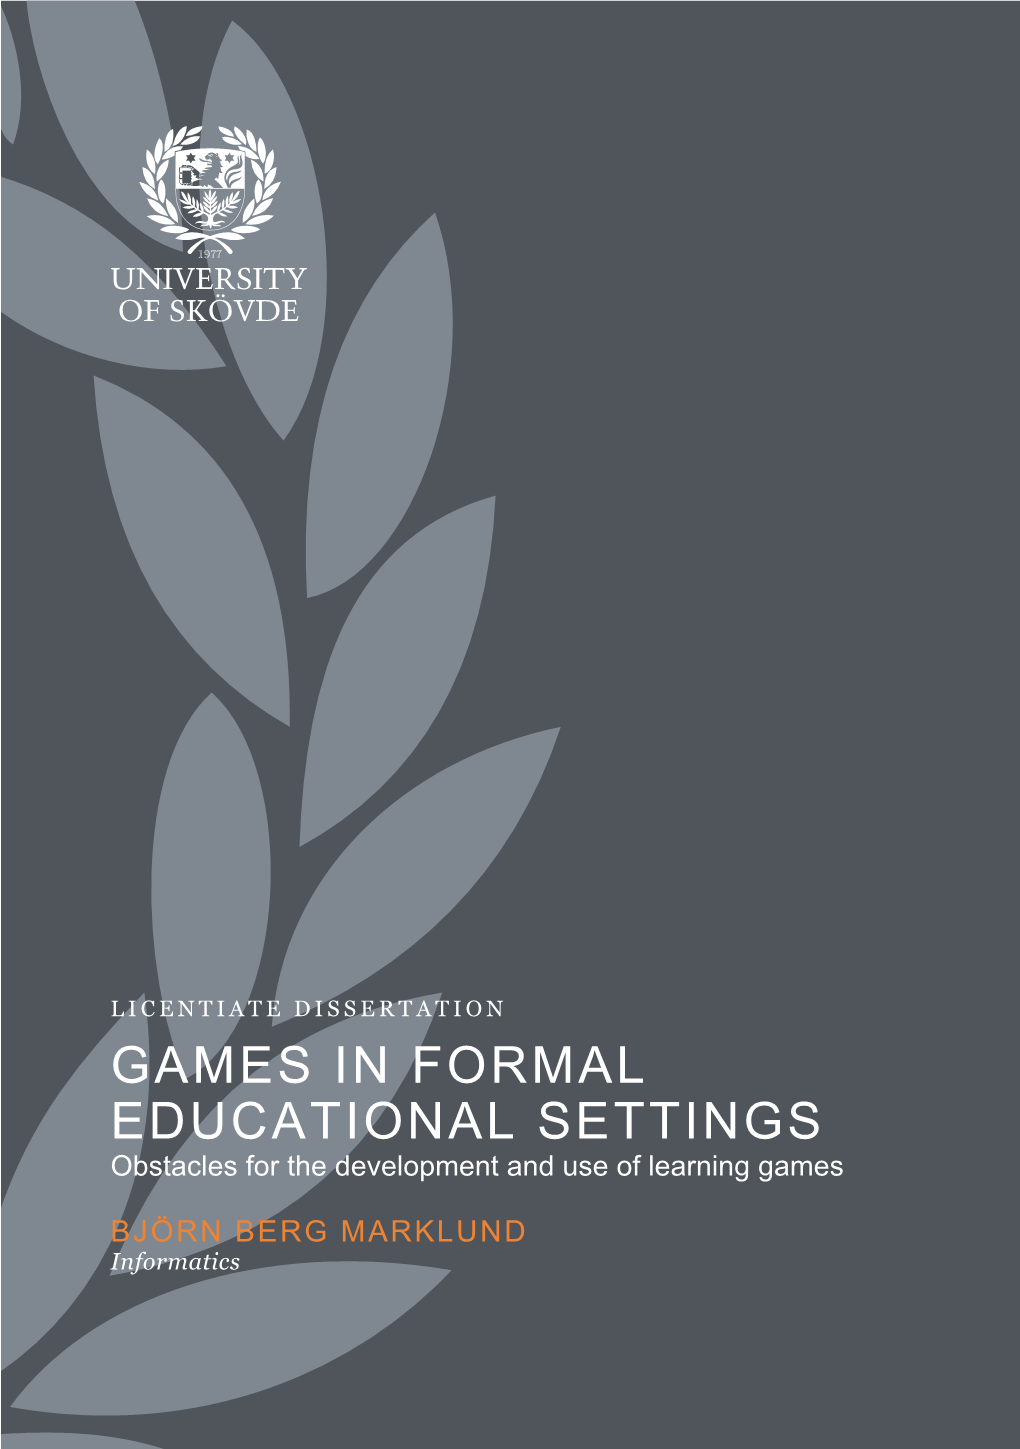 GAMES in FORMAL EDUCATIONAL SETTINGS Obstacles for the Development and Use of Learning Games